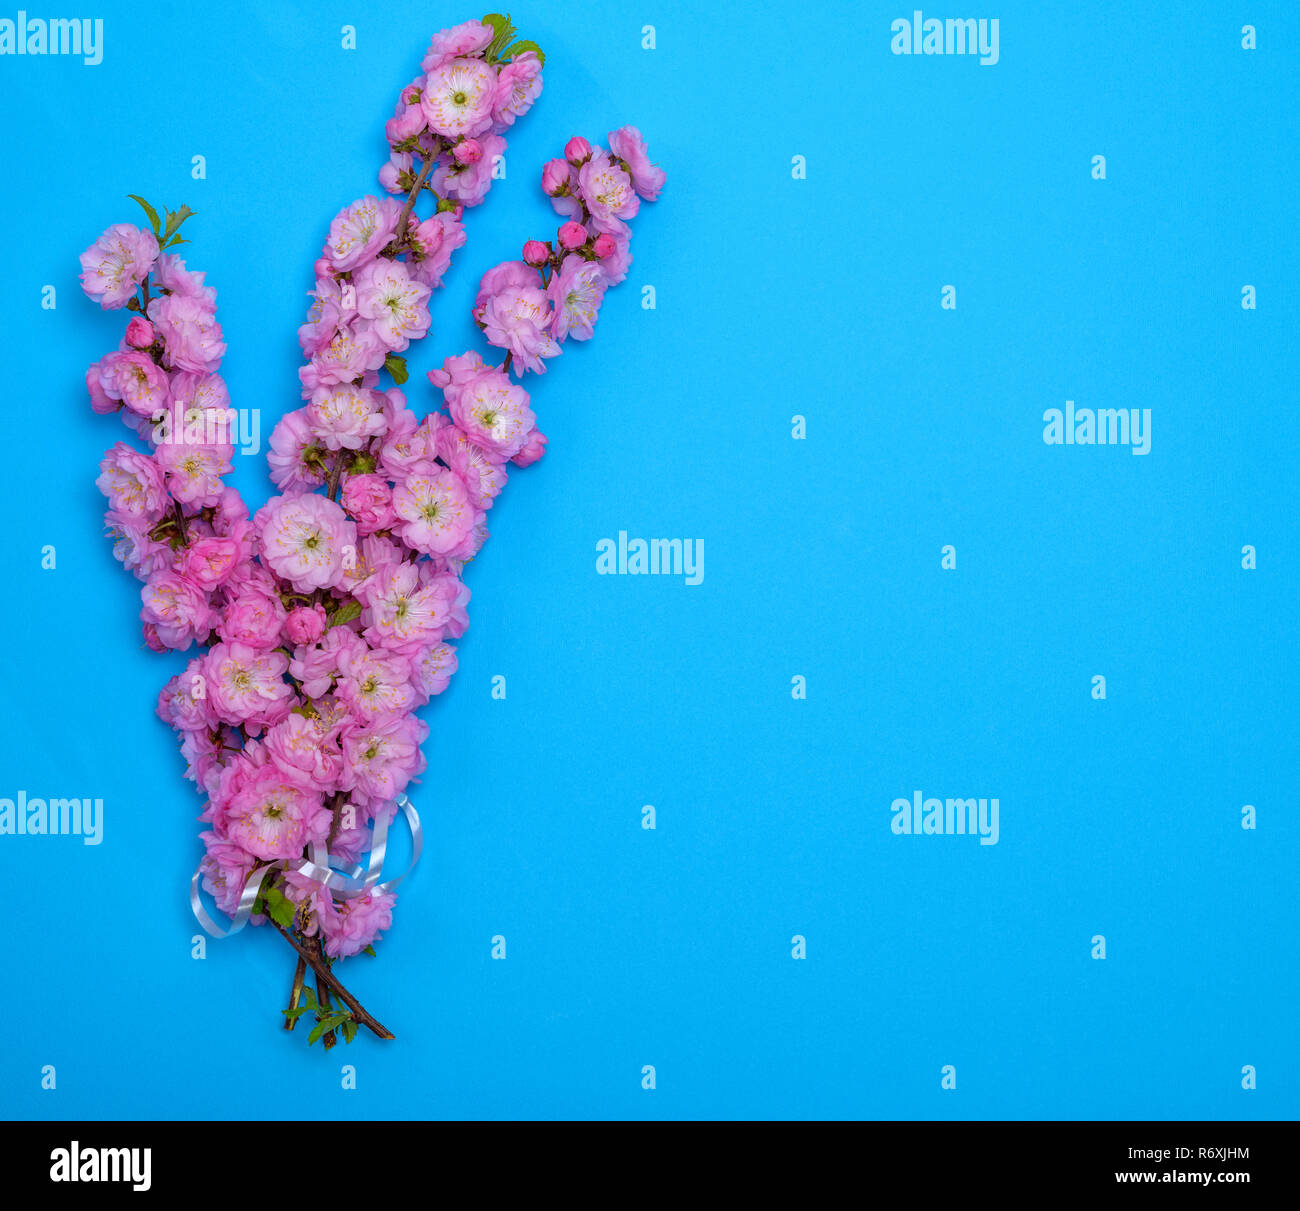 branches with pink flowers Louiseania triloba on a blue background Stock Photo